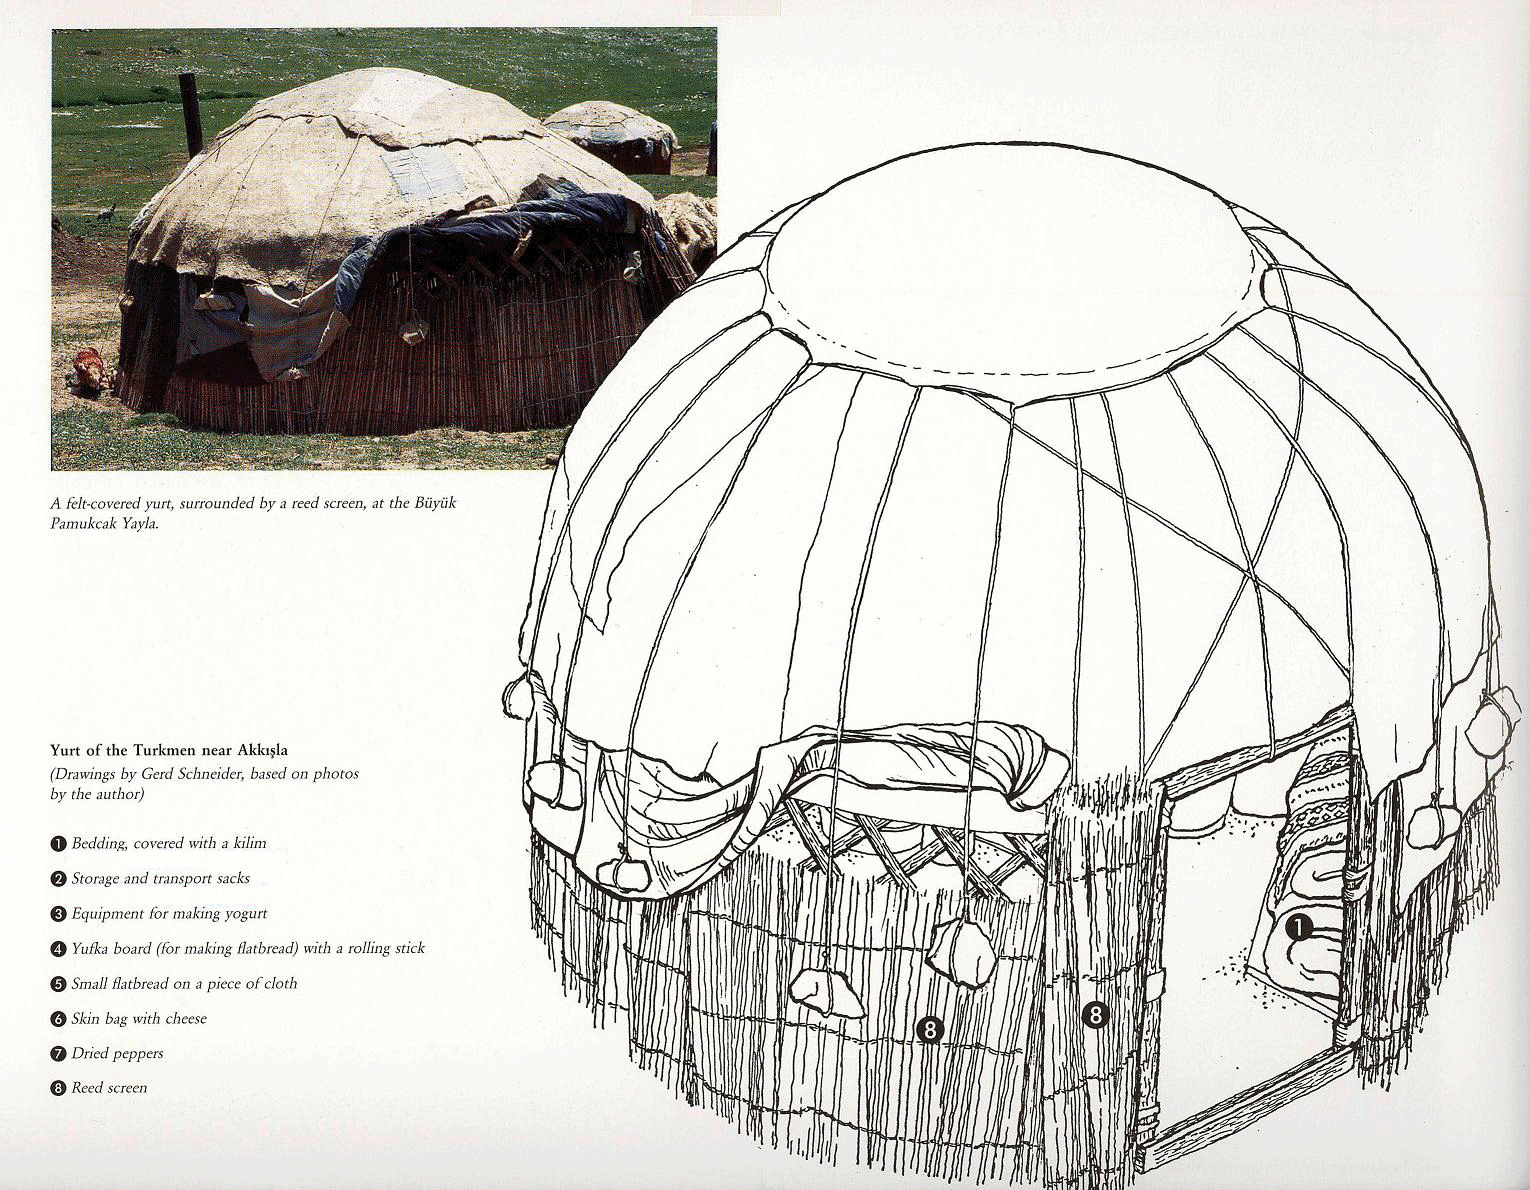 Anatolian Turkmen round felt tent drawing, from the book Nomads in Anatolia by Harald Böhmer